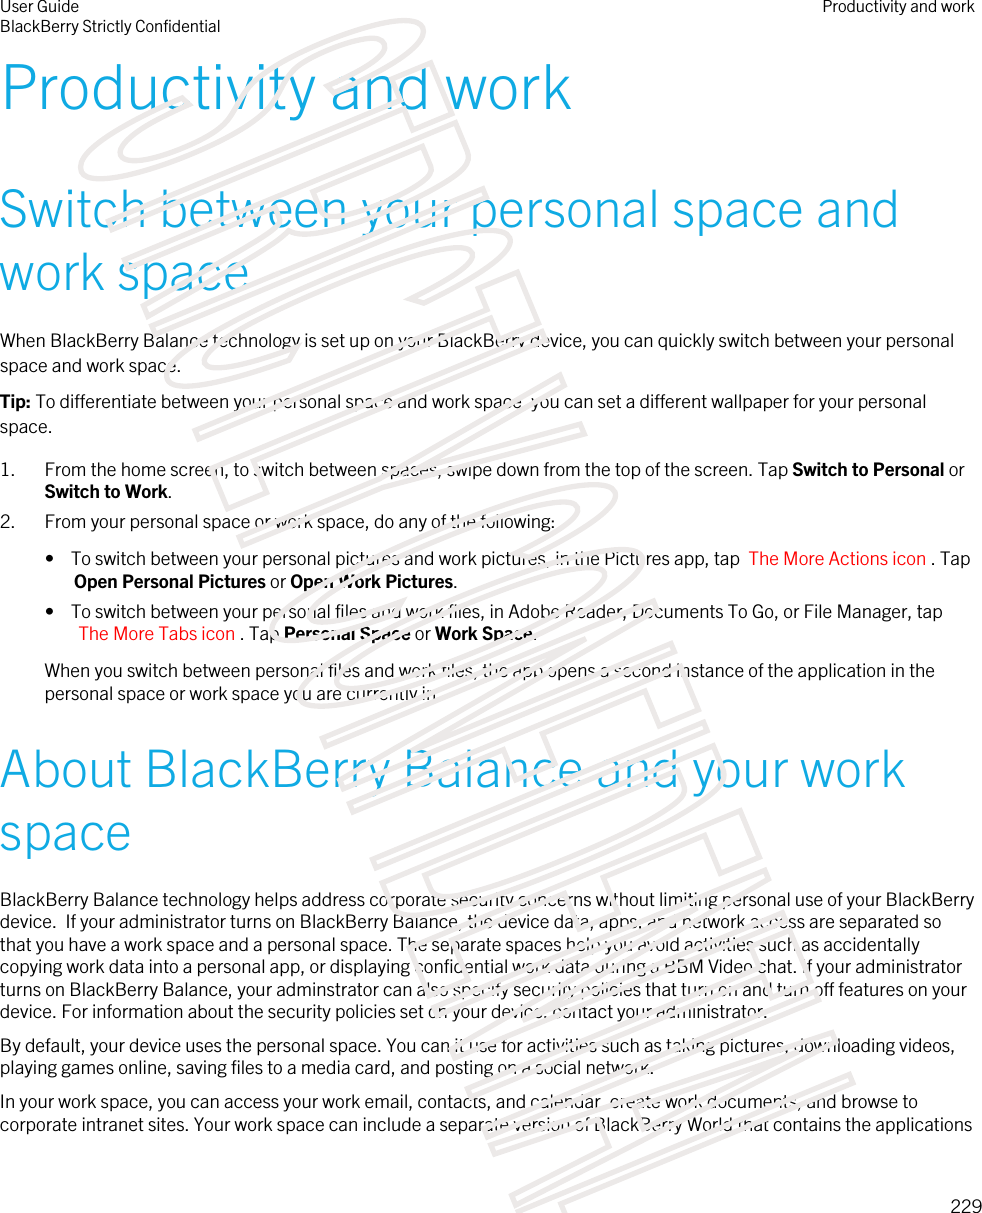 Productivity and workSwitch between your personal space and work spaceWhen BlackBerry Balance technology is set up on your BlackBerry device, you can quickly switch between your personal space and work space.Tip: To differentiate between your personal space and work space, you can set a different wallpaper for your personal space.1. From the home screen, to switch between spaces, swipe down from the top of the screen. Tap Switch to Personal or Switch to Work.2. From your personal space or work space, do any of the following:•  To switch between your personal pictures and work pictures, in the Pictures app, tap  The More Actions icon . Tap Open Personal Pictures or Open Work Pictures.•  To switch between your personal files and work files, in Adobe Reader, Documents To Go, or File Manager, tap The More Tabs icon . Tap Personal Space or Work Space.When you switch between personal files and work files, the app opens a second instance of the application in the personal space or work space you are currently in.About BlackBerry Balance and your work spaceBlackBerry Balance technology helps address corporate security concerns without limiting personal use of your BlackBerry device.  If your administrator turns on BlackBerry Balance, the device data, apps, and network access are separated so that you have a work space and a personal space. The separate spaces help you avoid activities such as accidentally copying work data into a personal app, or displaying confidential work data during a BBM Video chat. If your administrator turns on BlackBerry Balance, your adminstrator can also specify security policies that turn on and turn off features on your device. For information about the security policies set on your device, contact your administrator.By default, your device uses the personal space. You can it use for activities such as taking pictures, downloading videos, playing games online, saving files to a media card, and posting on a social network. In your work space, you can access your work email, contacts, and calendar, create work documents, and browse to corporate intranet sites. Your work space can include a separate version of BlackBerry World that contains the applications User GuideBlackBerry Strictly ConfidentialProductivity and work229STRICTLY CONFIDENTIAL